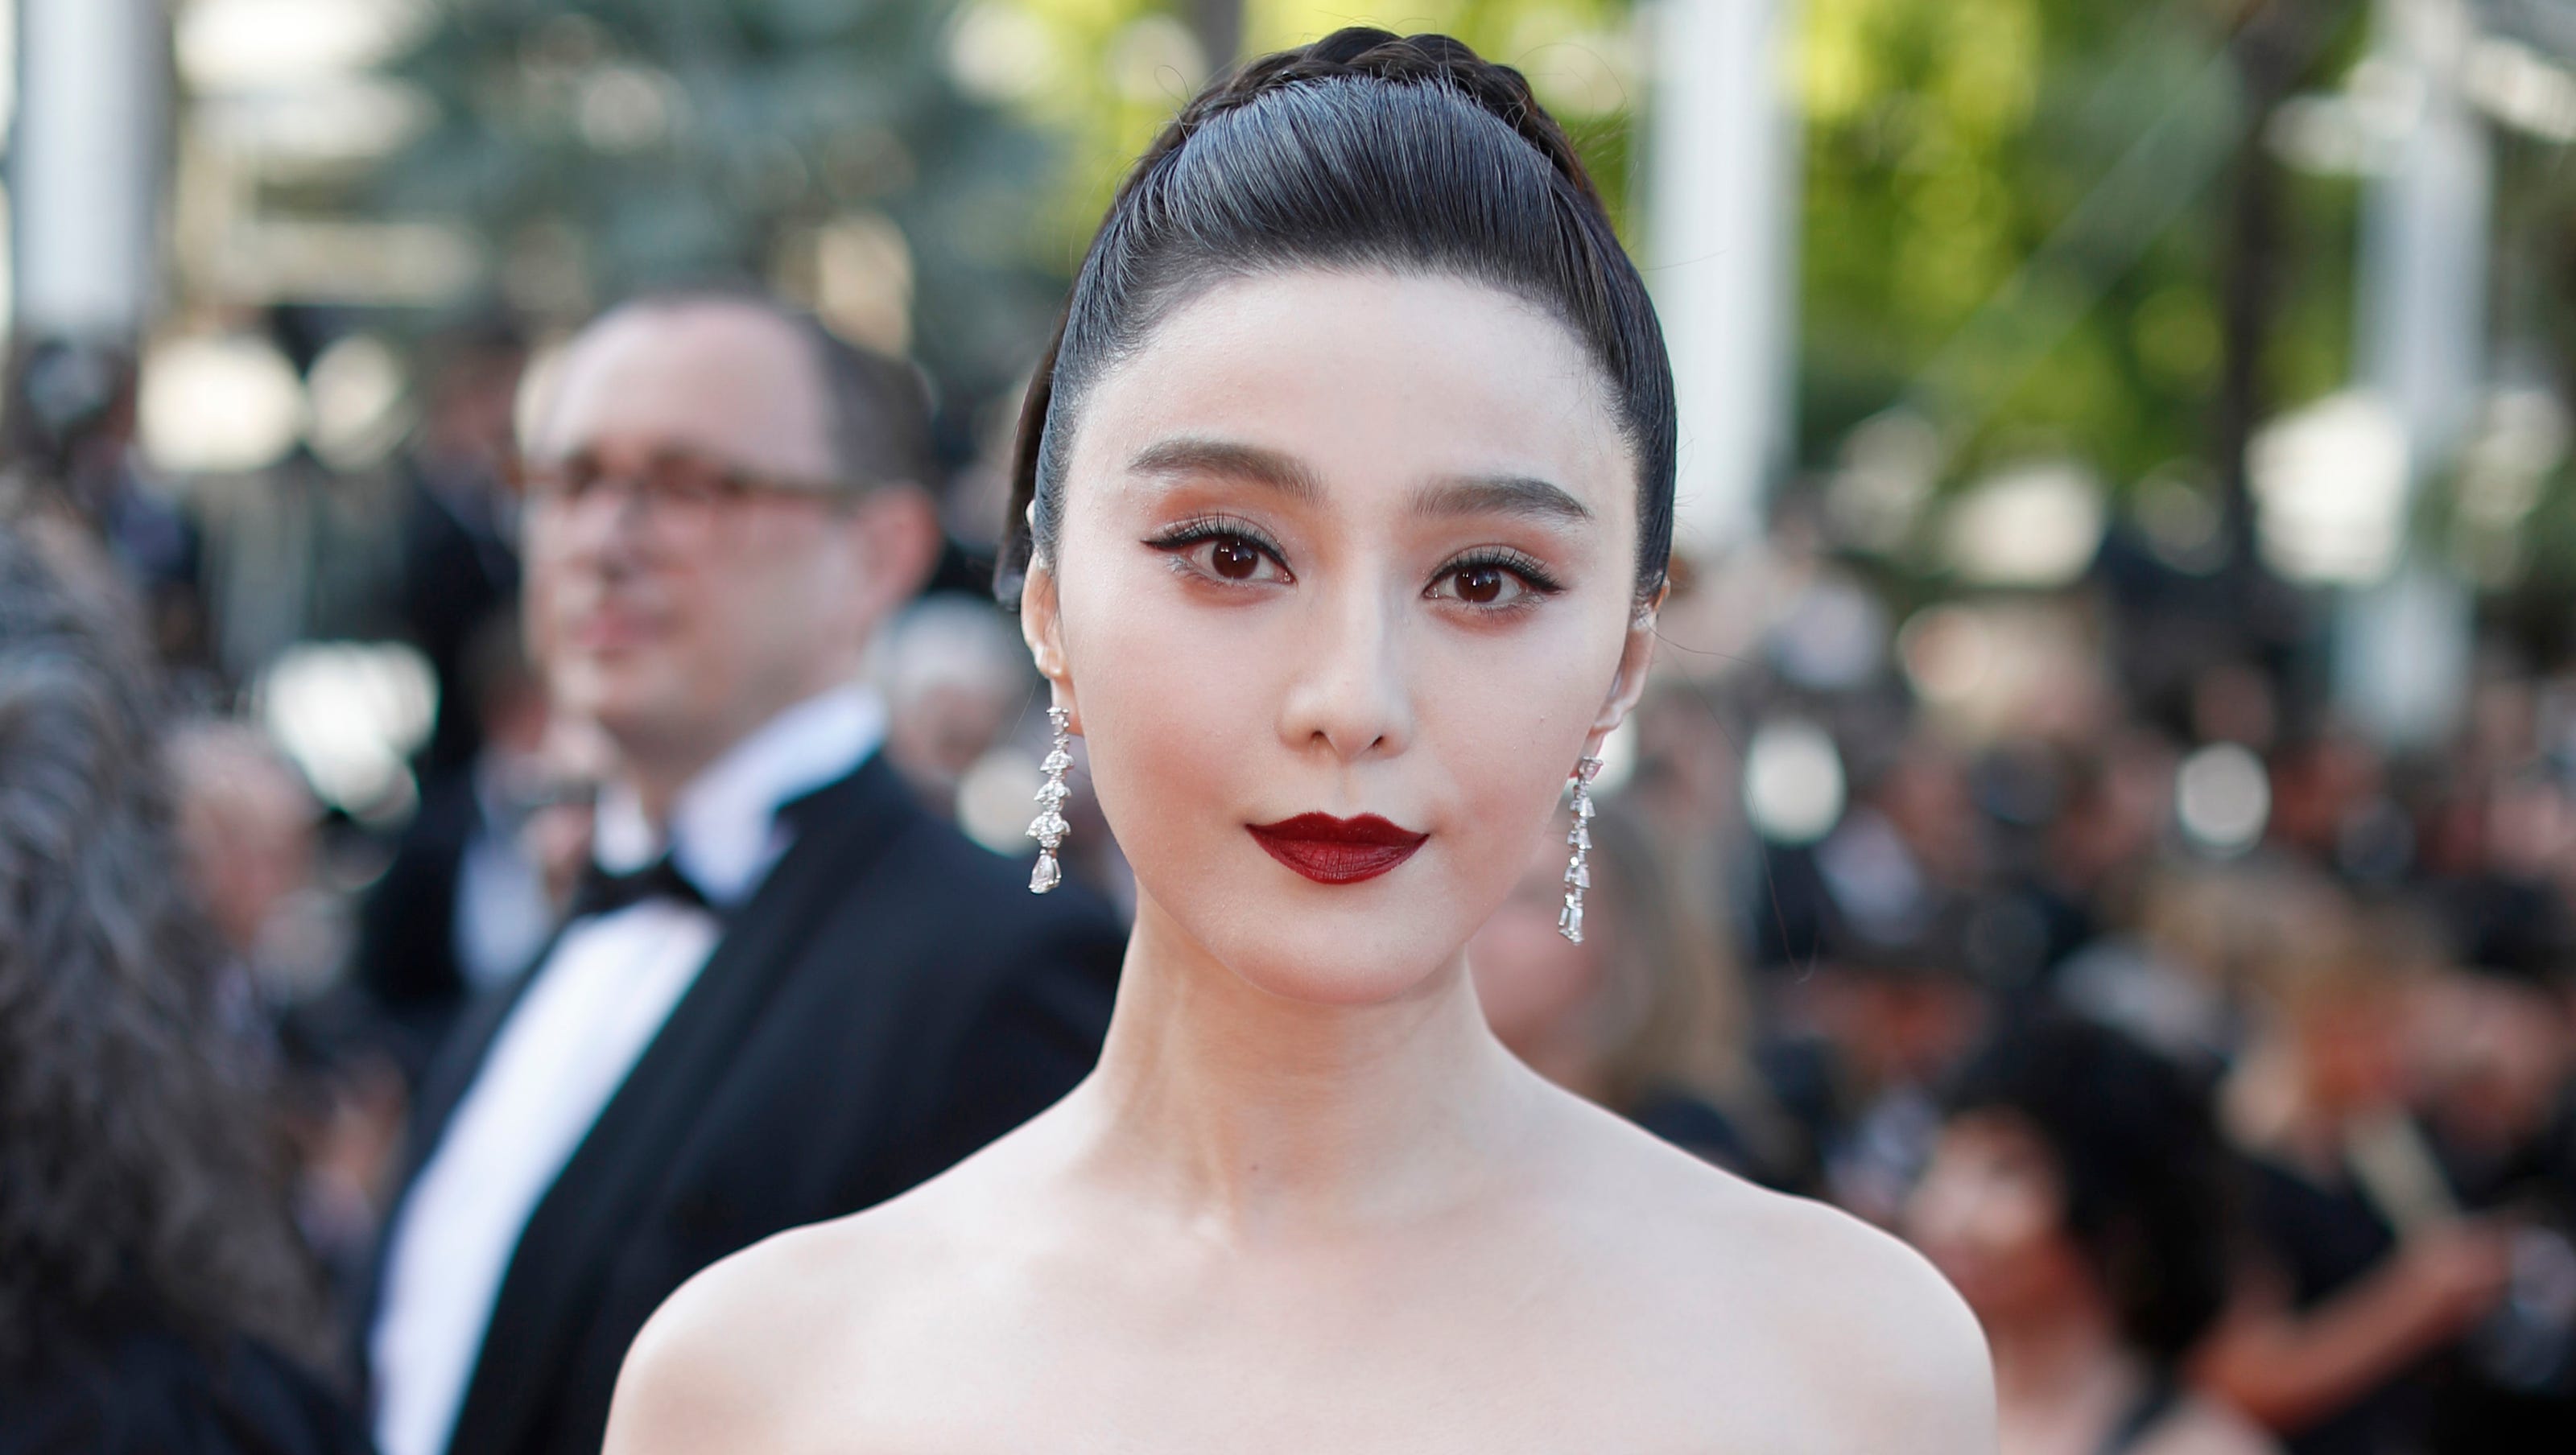 Bingbing returns months after mysterious disappearance